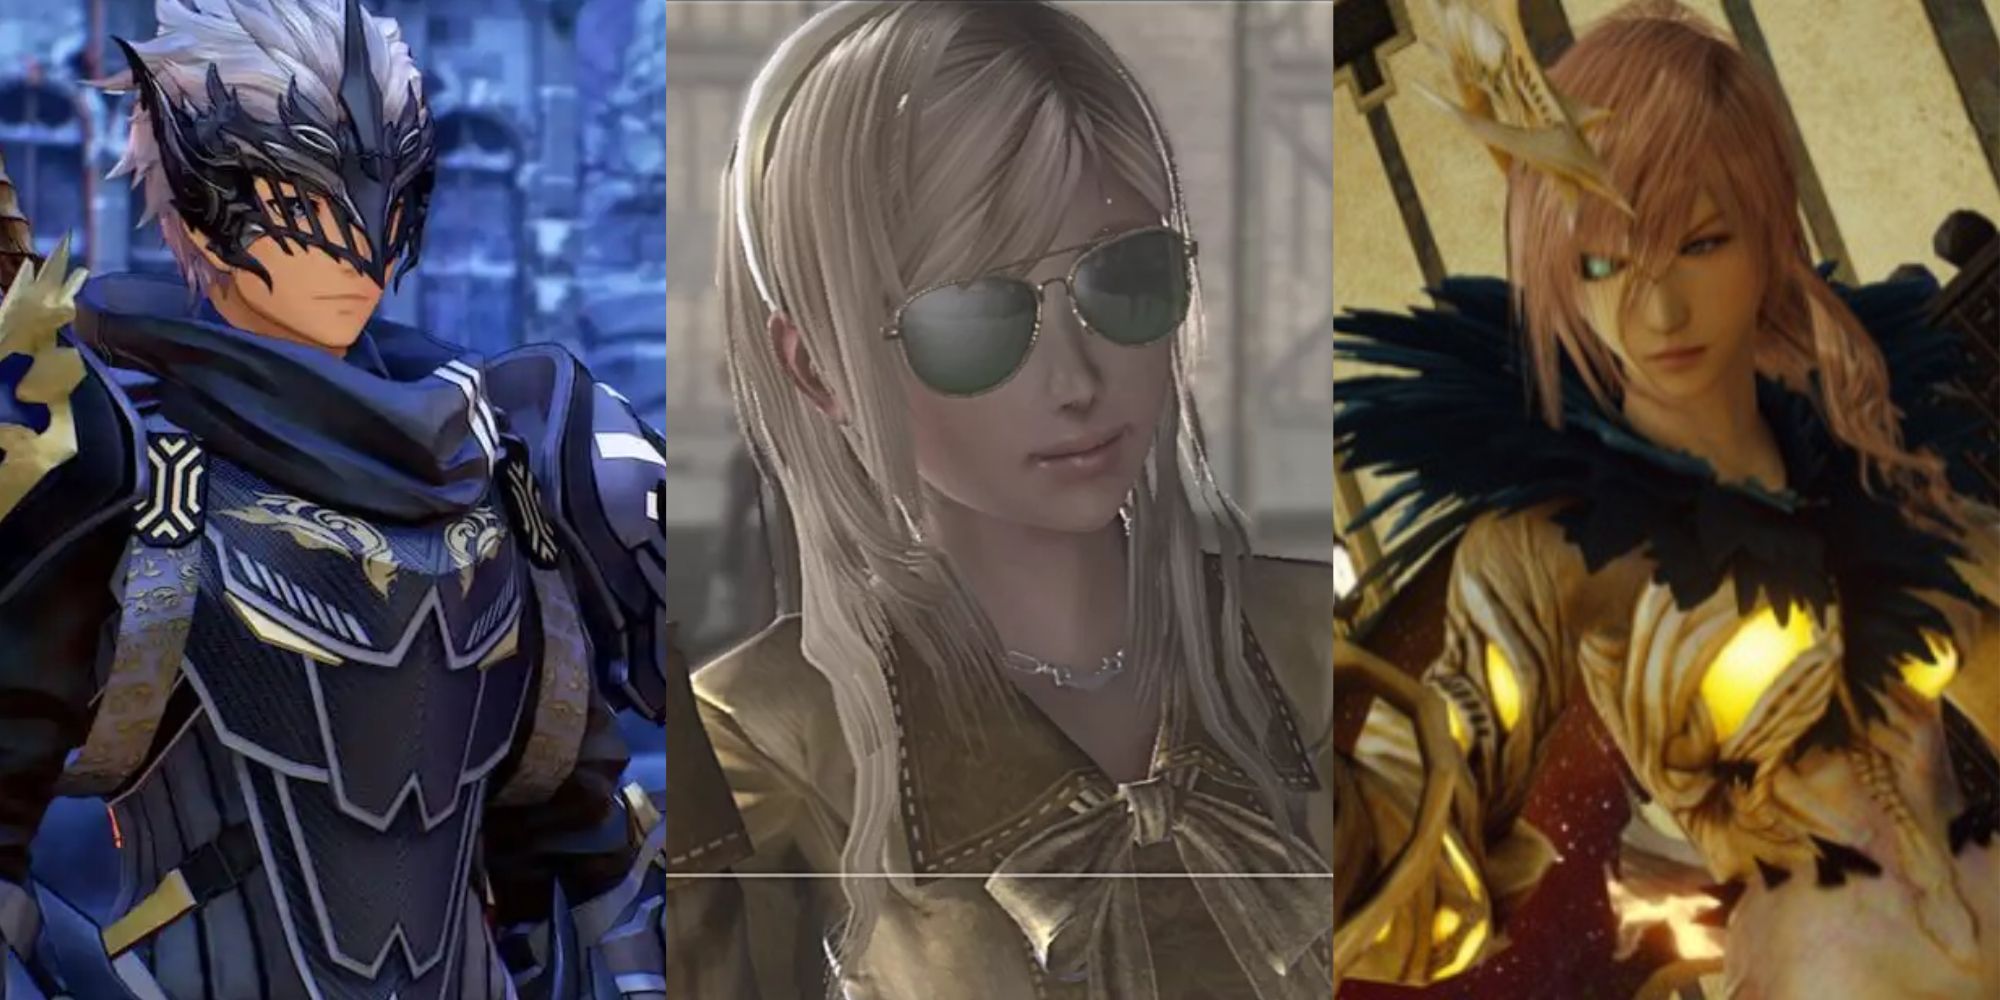 Alphyn from Tales of Arise in black heavy armor, Leanne from Resonance of Fate in sunglasses, and Lightning from Lightning Returns Final Fantasy in gold clothes with dark sclera in one eye